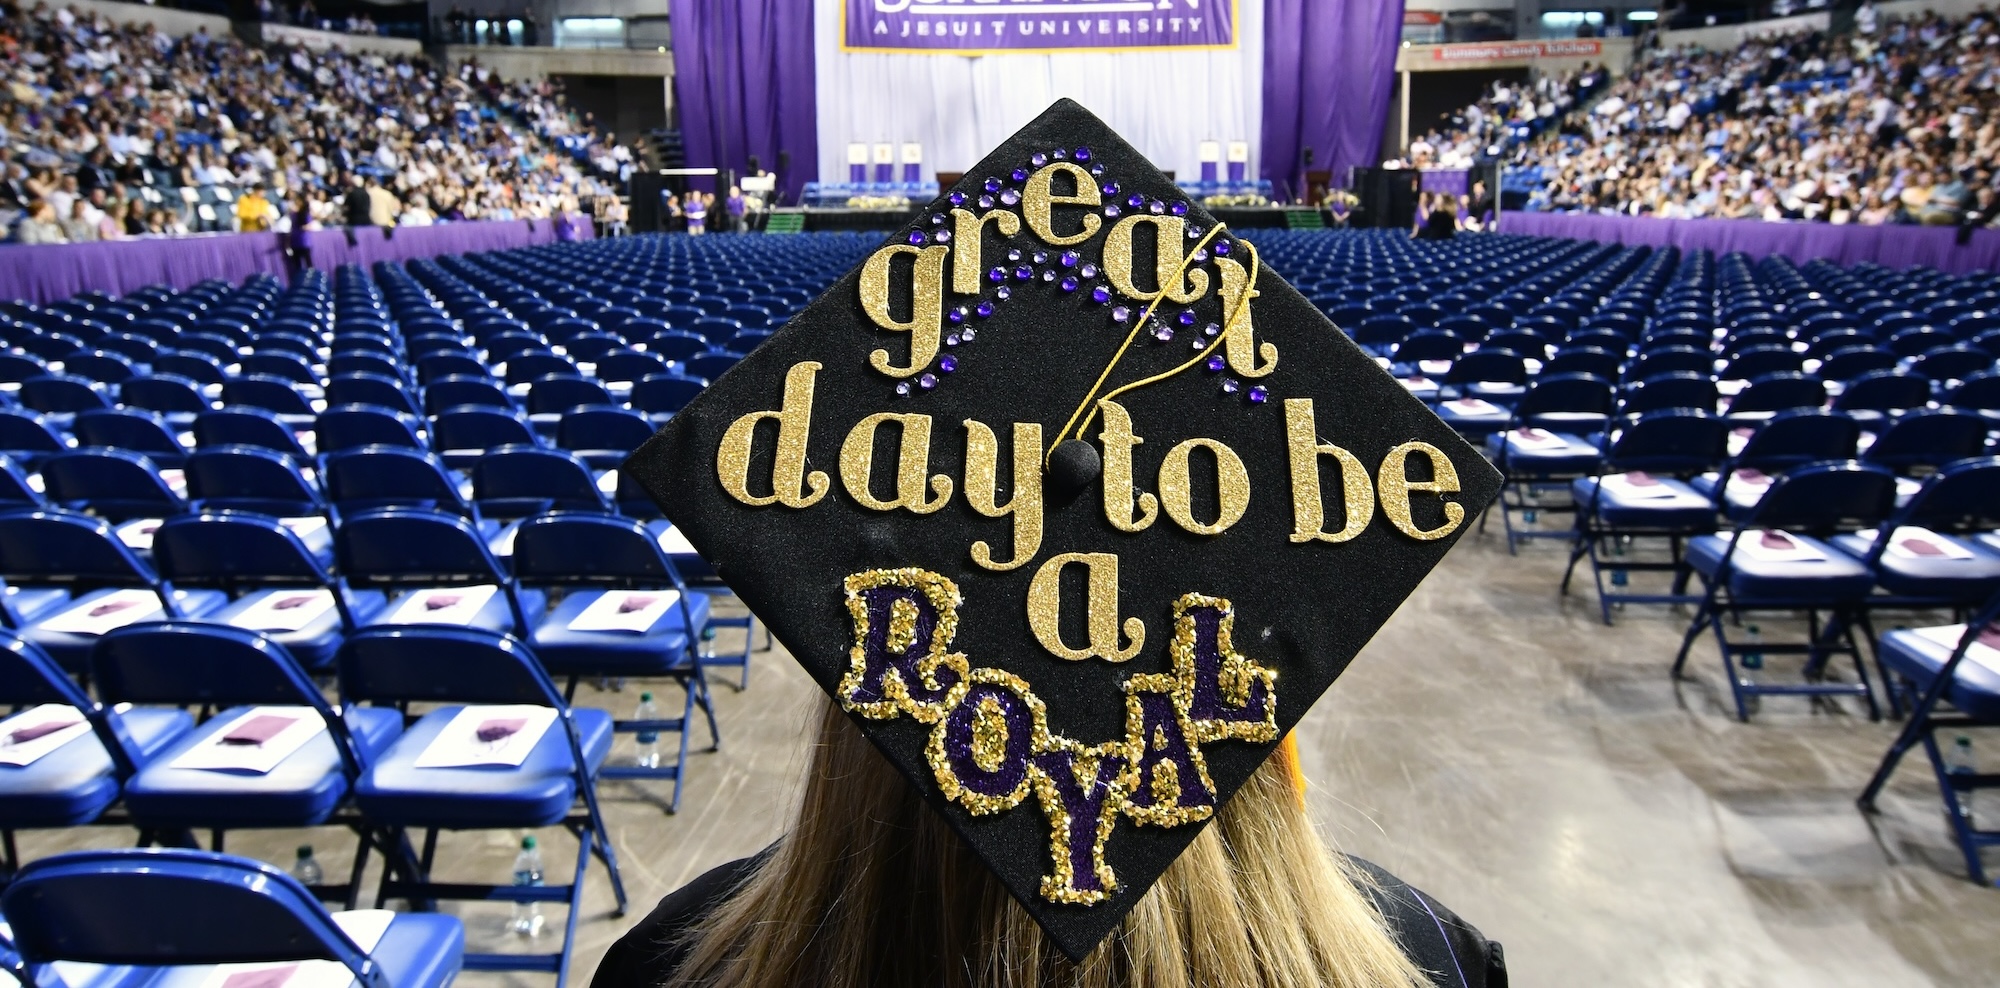 Commencement cap "Great Day to be a Royal"